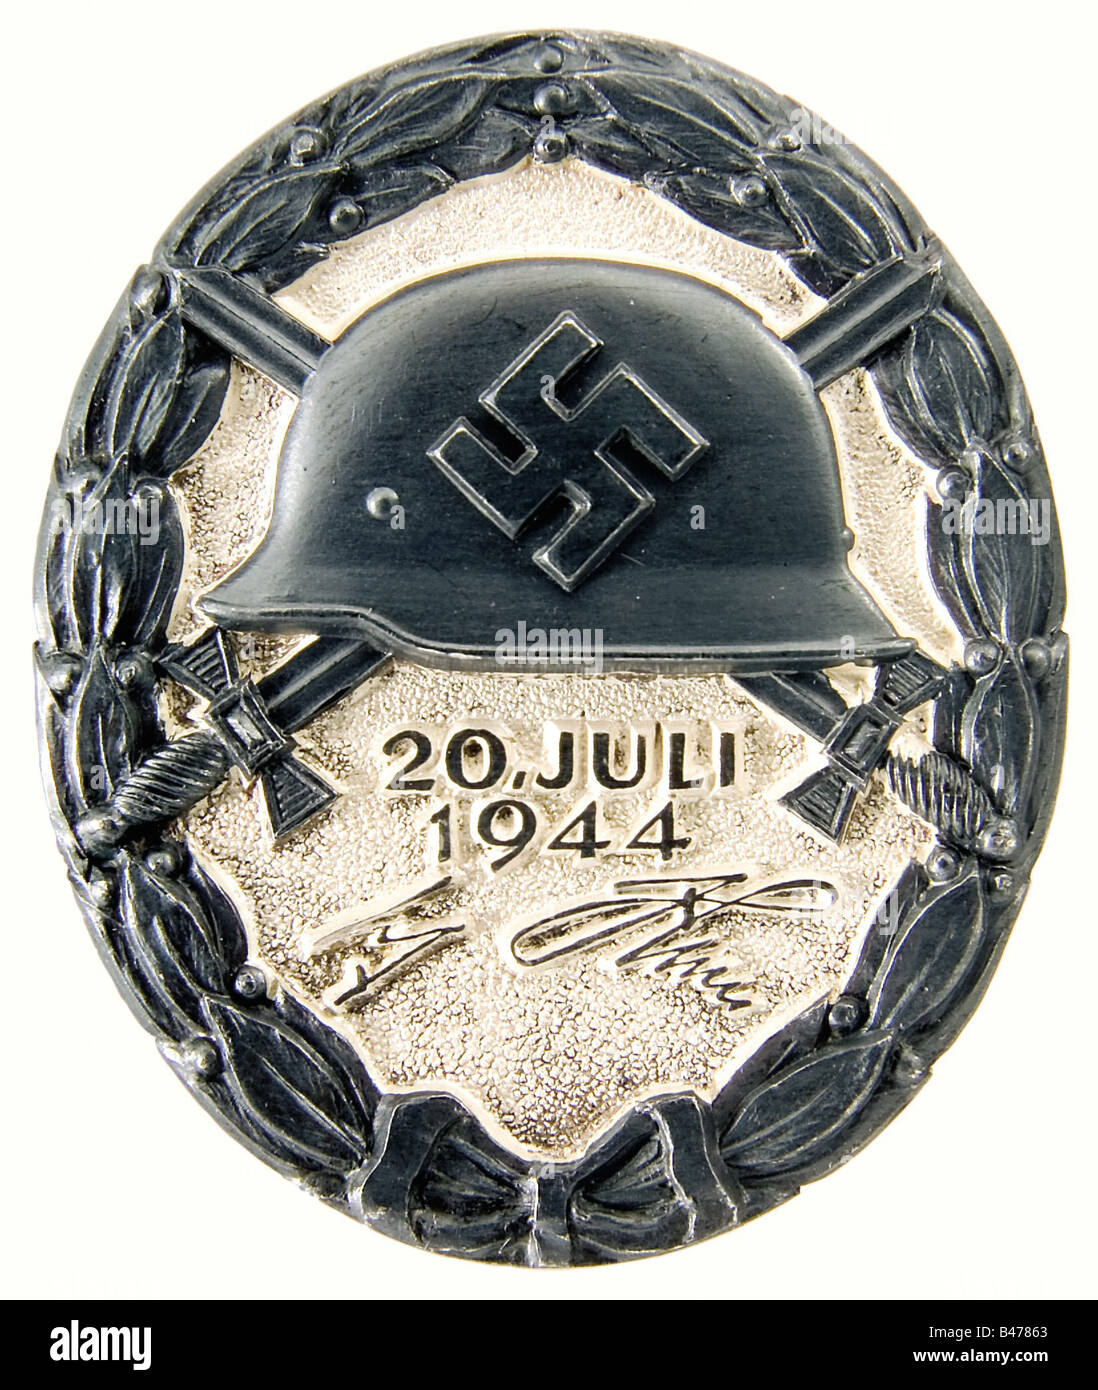 A Wound Badge 20 July, 1944 in Black., In original presentation case. Silver, with areas of patination. Reverse stamped 'L/12' for C.E. Juncker Berlin and '800'. 44.47 x 37.22 mm, weight 38.98 g (OEK 3849). Original black presentation case, the interior lined in black velvet and white silk, magnetic fittings. Of extreme rarity, only 23 were awarded in the three grades of gold, silver and black. Included is an expert opinion with photo by Detlev Niemann dated September 2005. historic, historical, 1930s, 20th century, awards, award, German Reich, Third Reich, Naz, Stock Photo